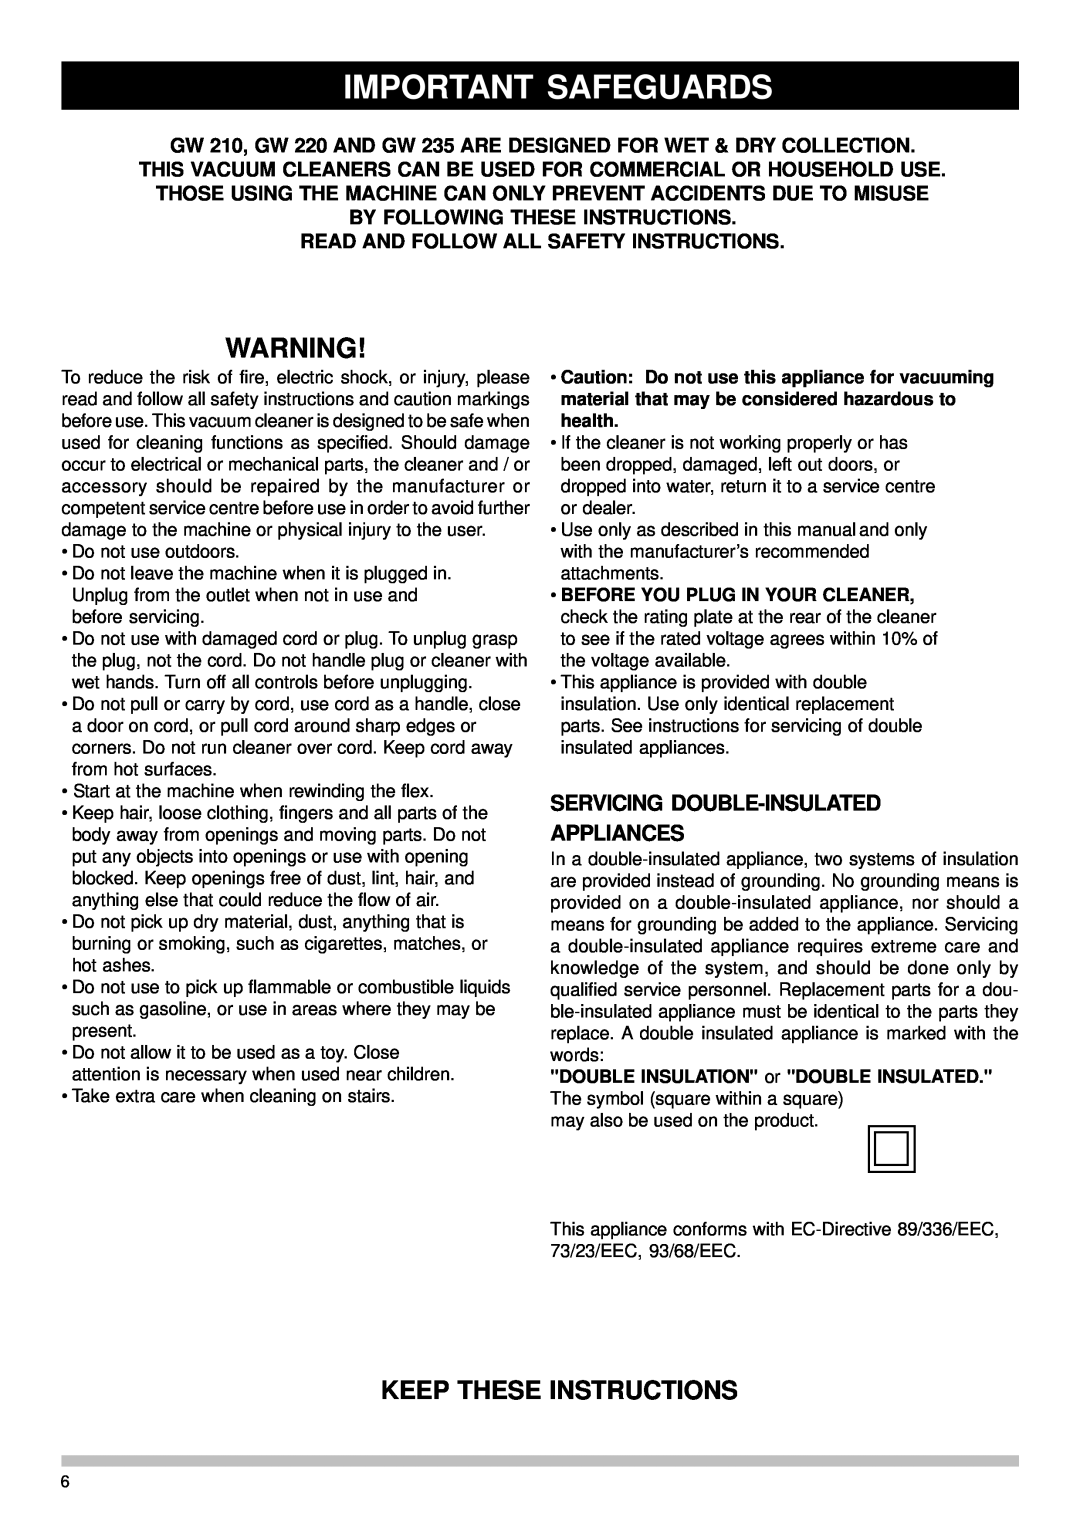 Nilfisk-Advance America GW 235 manual Important Safeguards, Keep These Instructions, Servicing Double-Insulated Appliances 